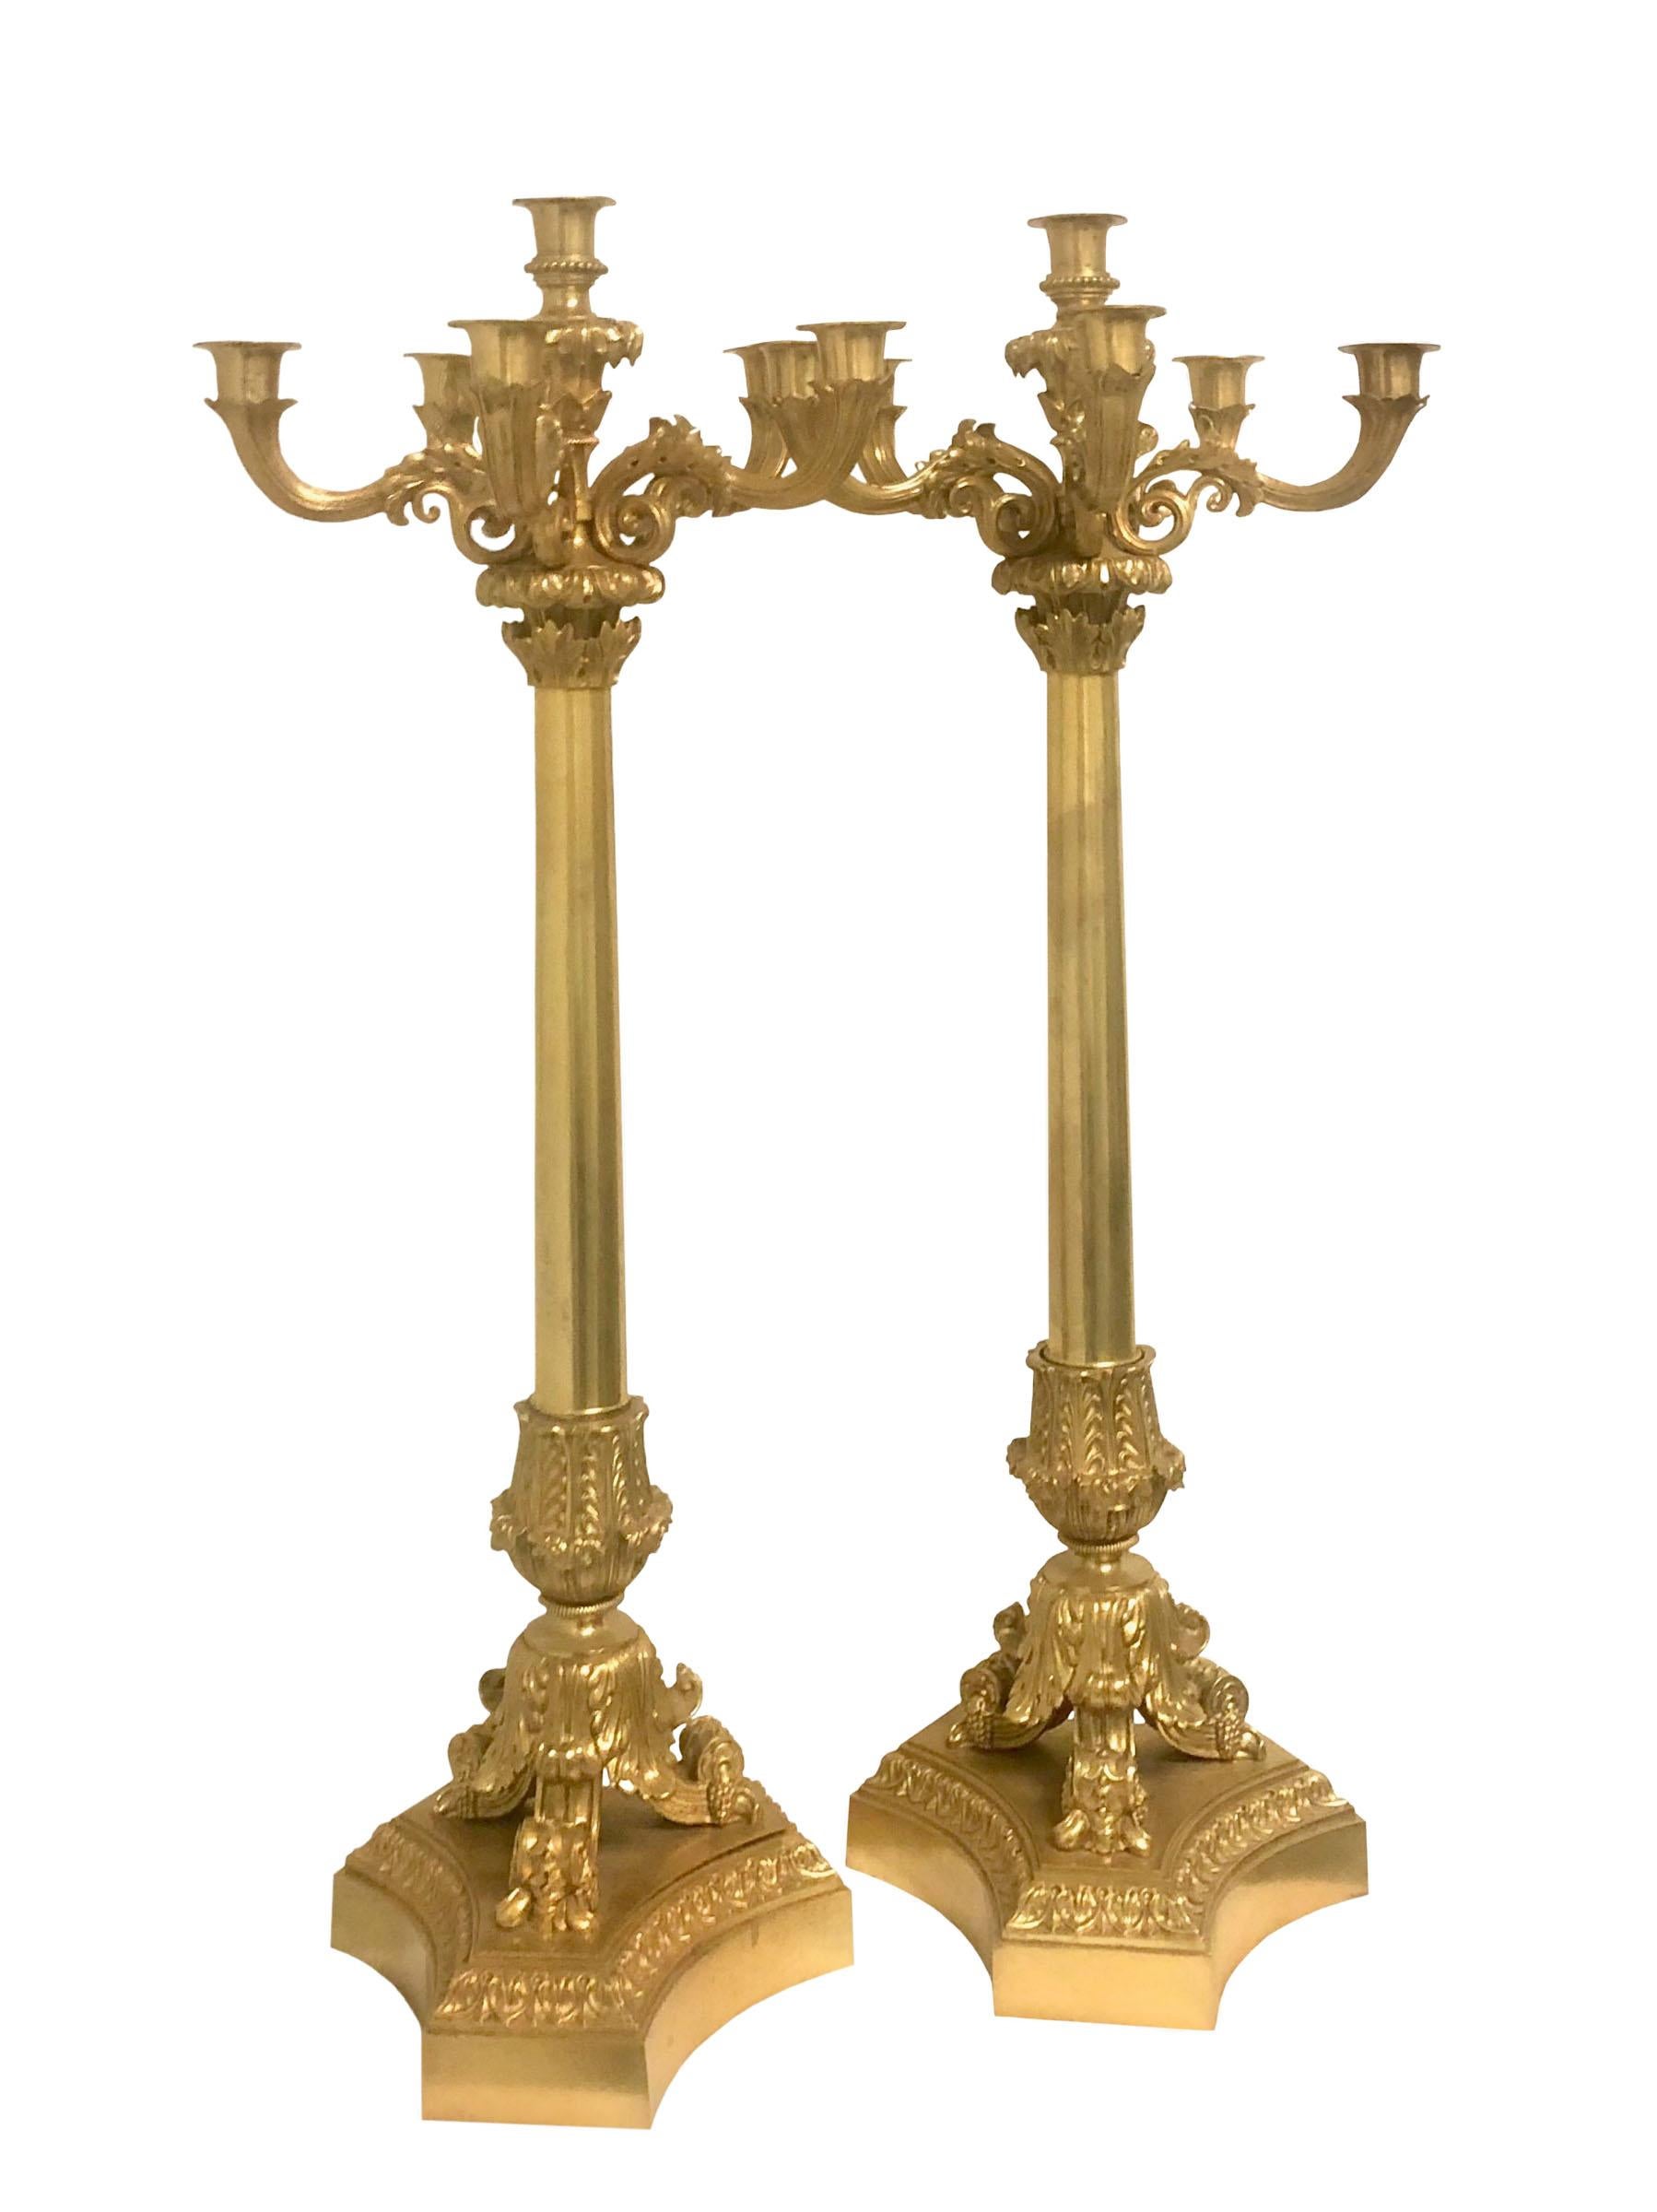 A pair of splendid 19th century neoclassical style bronze ormolu candelabra by Picard. These would make the perfect addition to any holiday table or mantle.